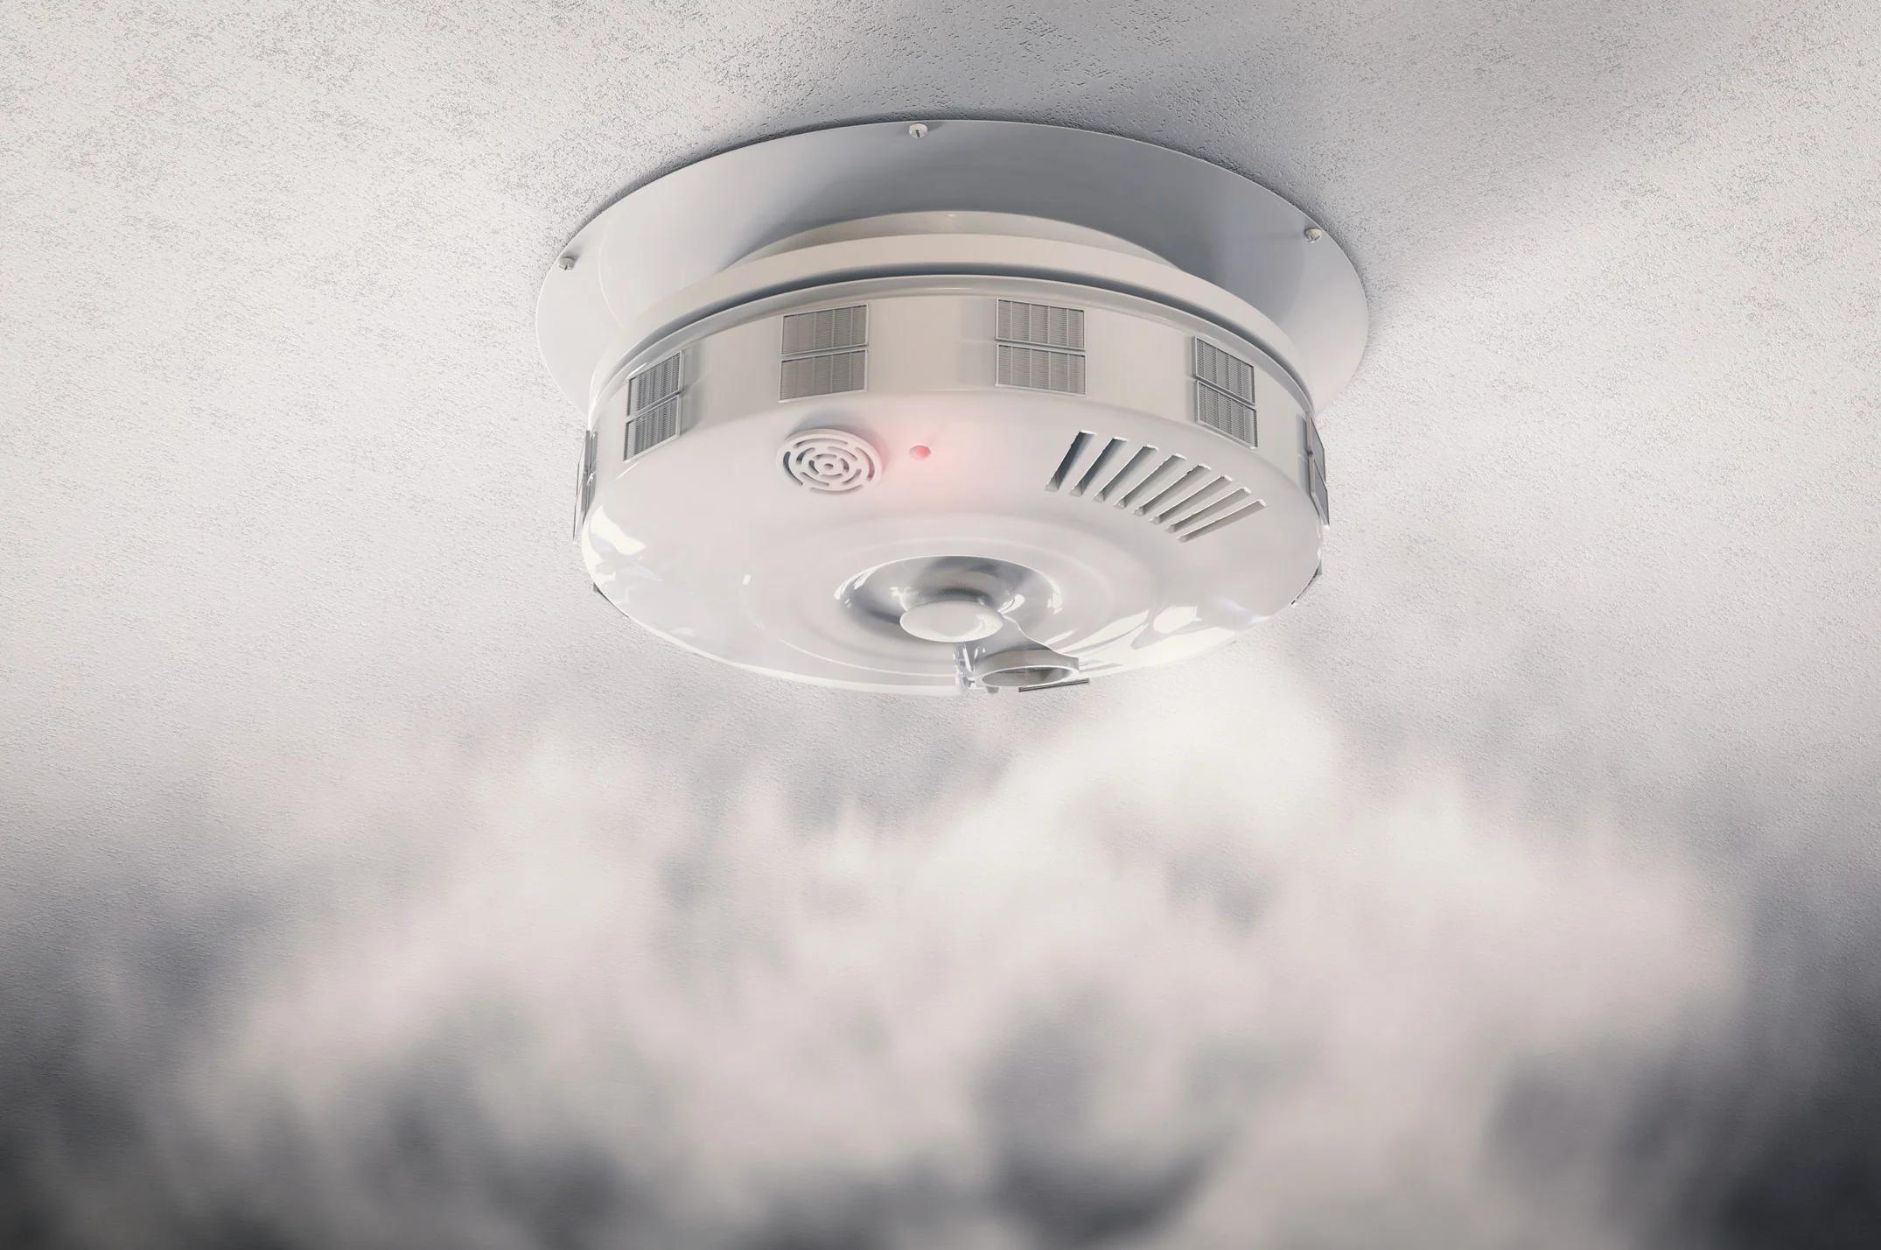 What Is A Smoke Detector?